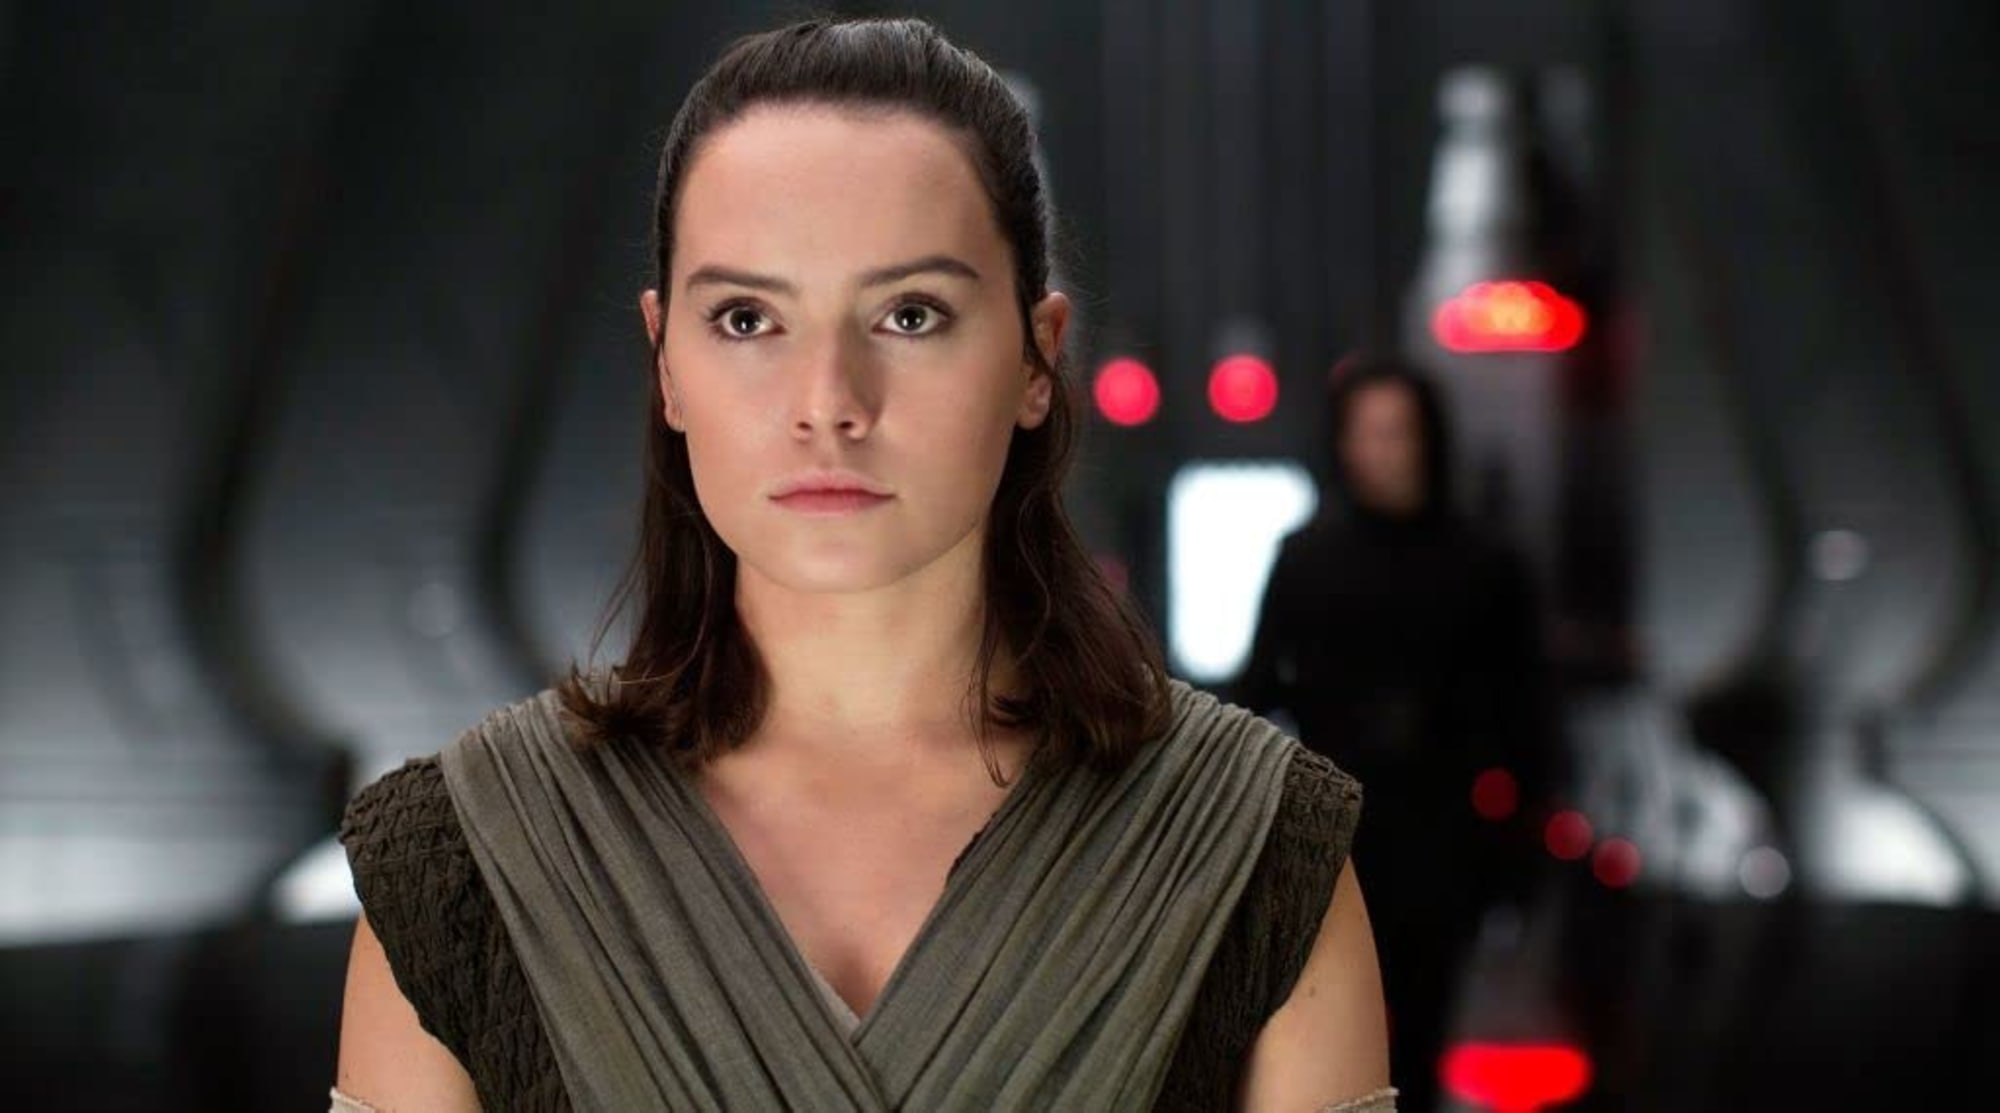 Star Wars Actor Daisy Ridley To Star In Upcoming Indie Drama